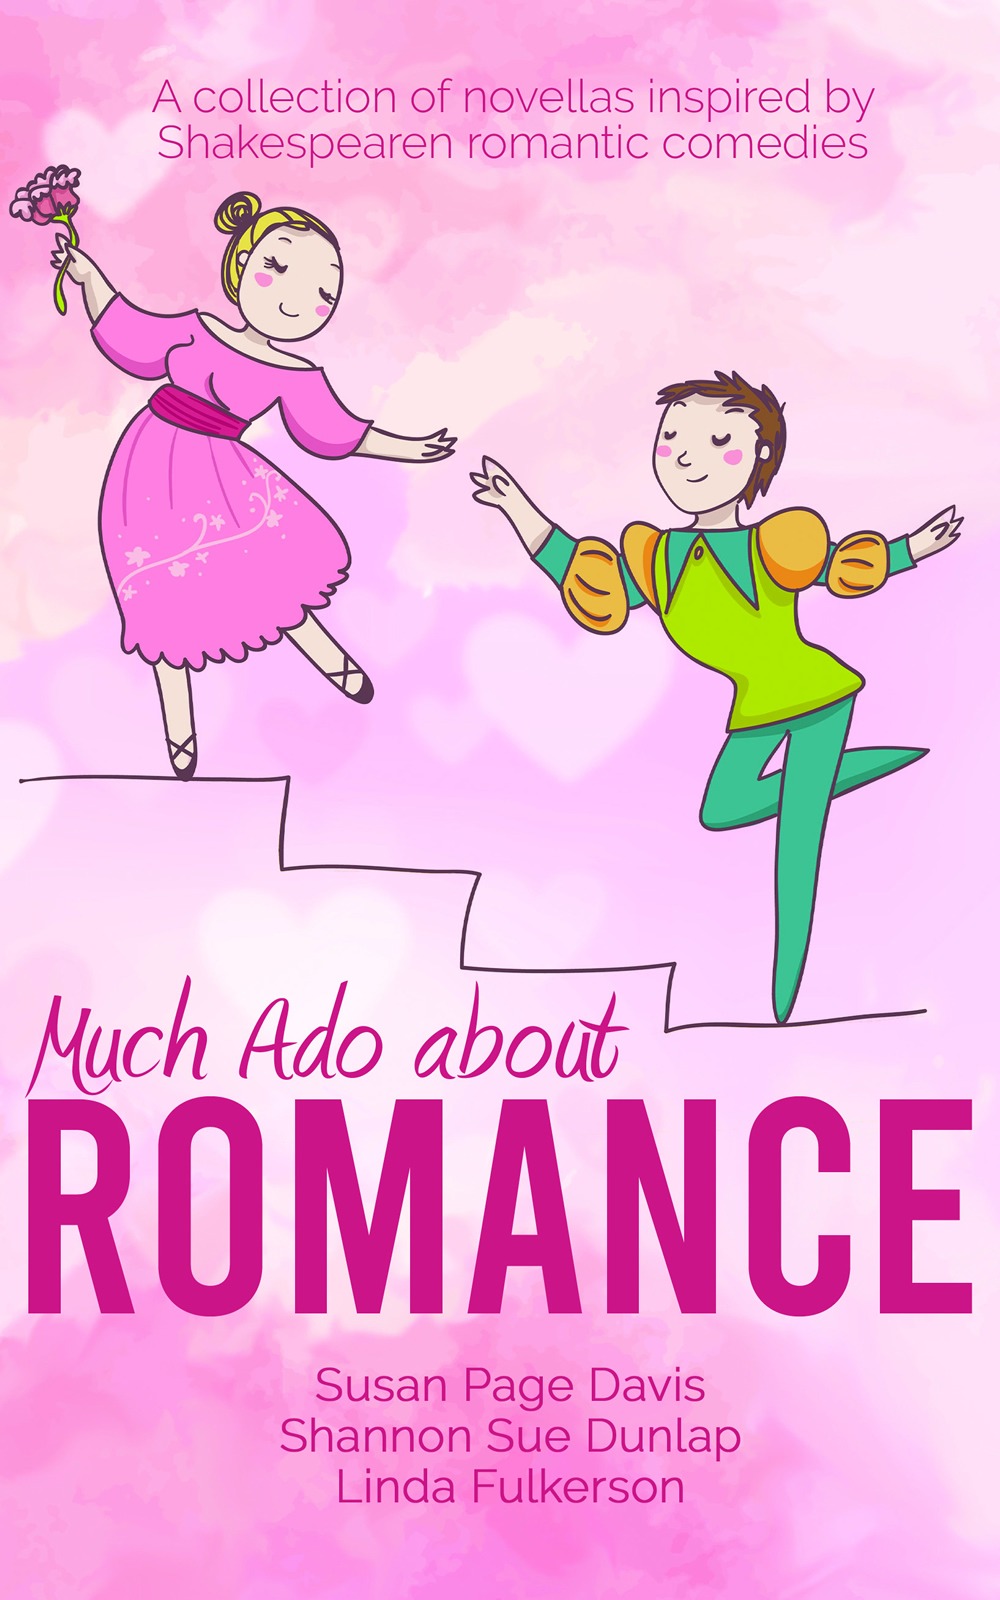 Much Ado about Romance by author Shannon Sue Dunlap